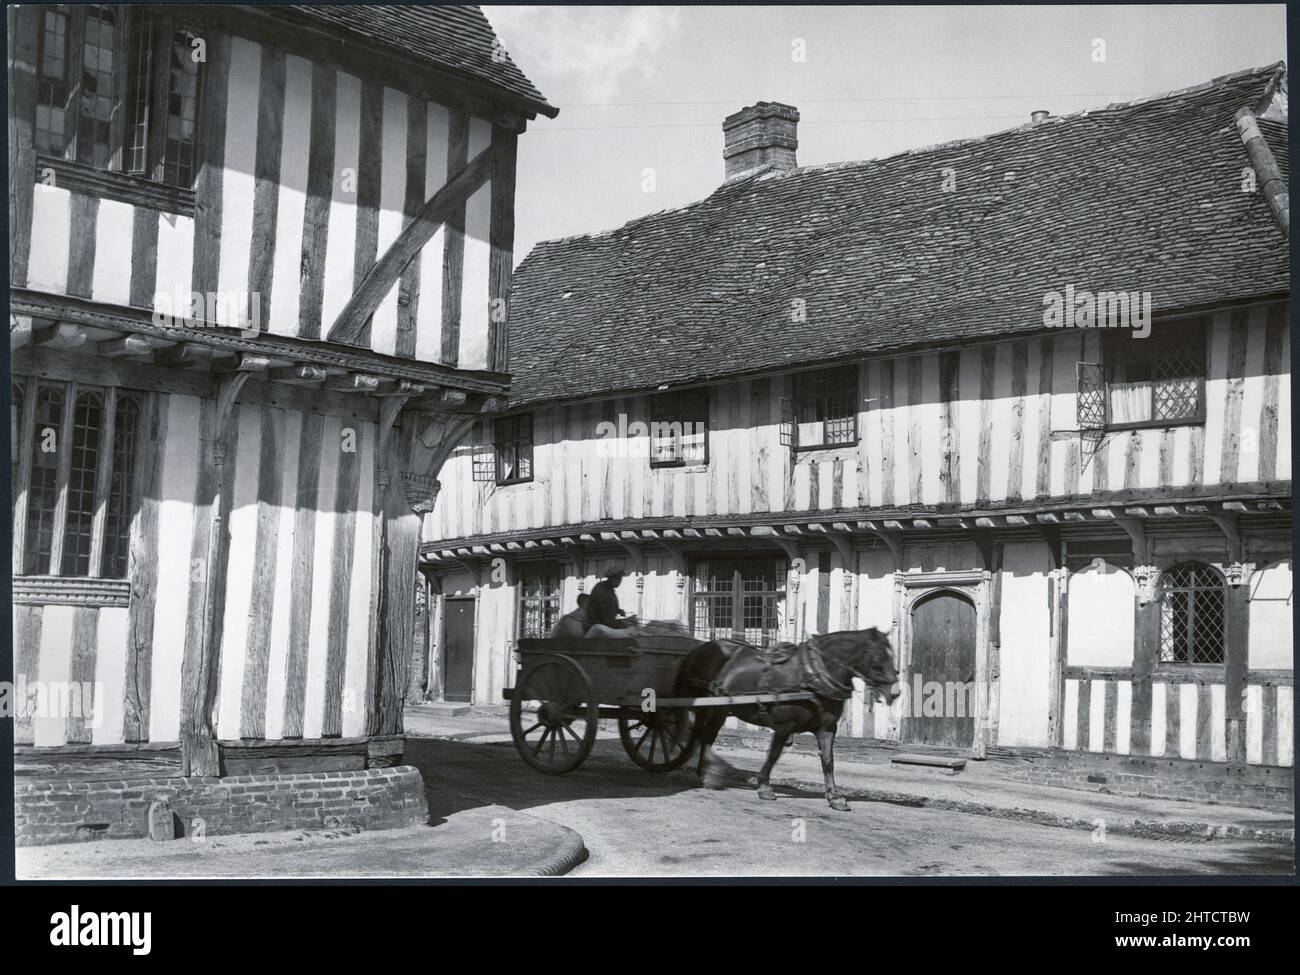 Lady Street, Lavenham, Lavenham, Babergh, Suffolk, 1925-1939. A horse and cart at the junction of Lady Street and Water Street with The old Wool Hall (on the left) and Tudor shops (on the right) Stock Photo